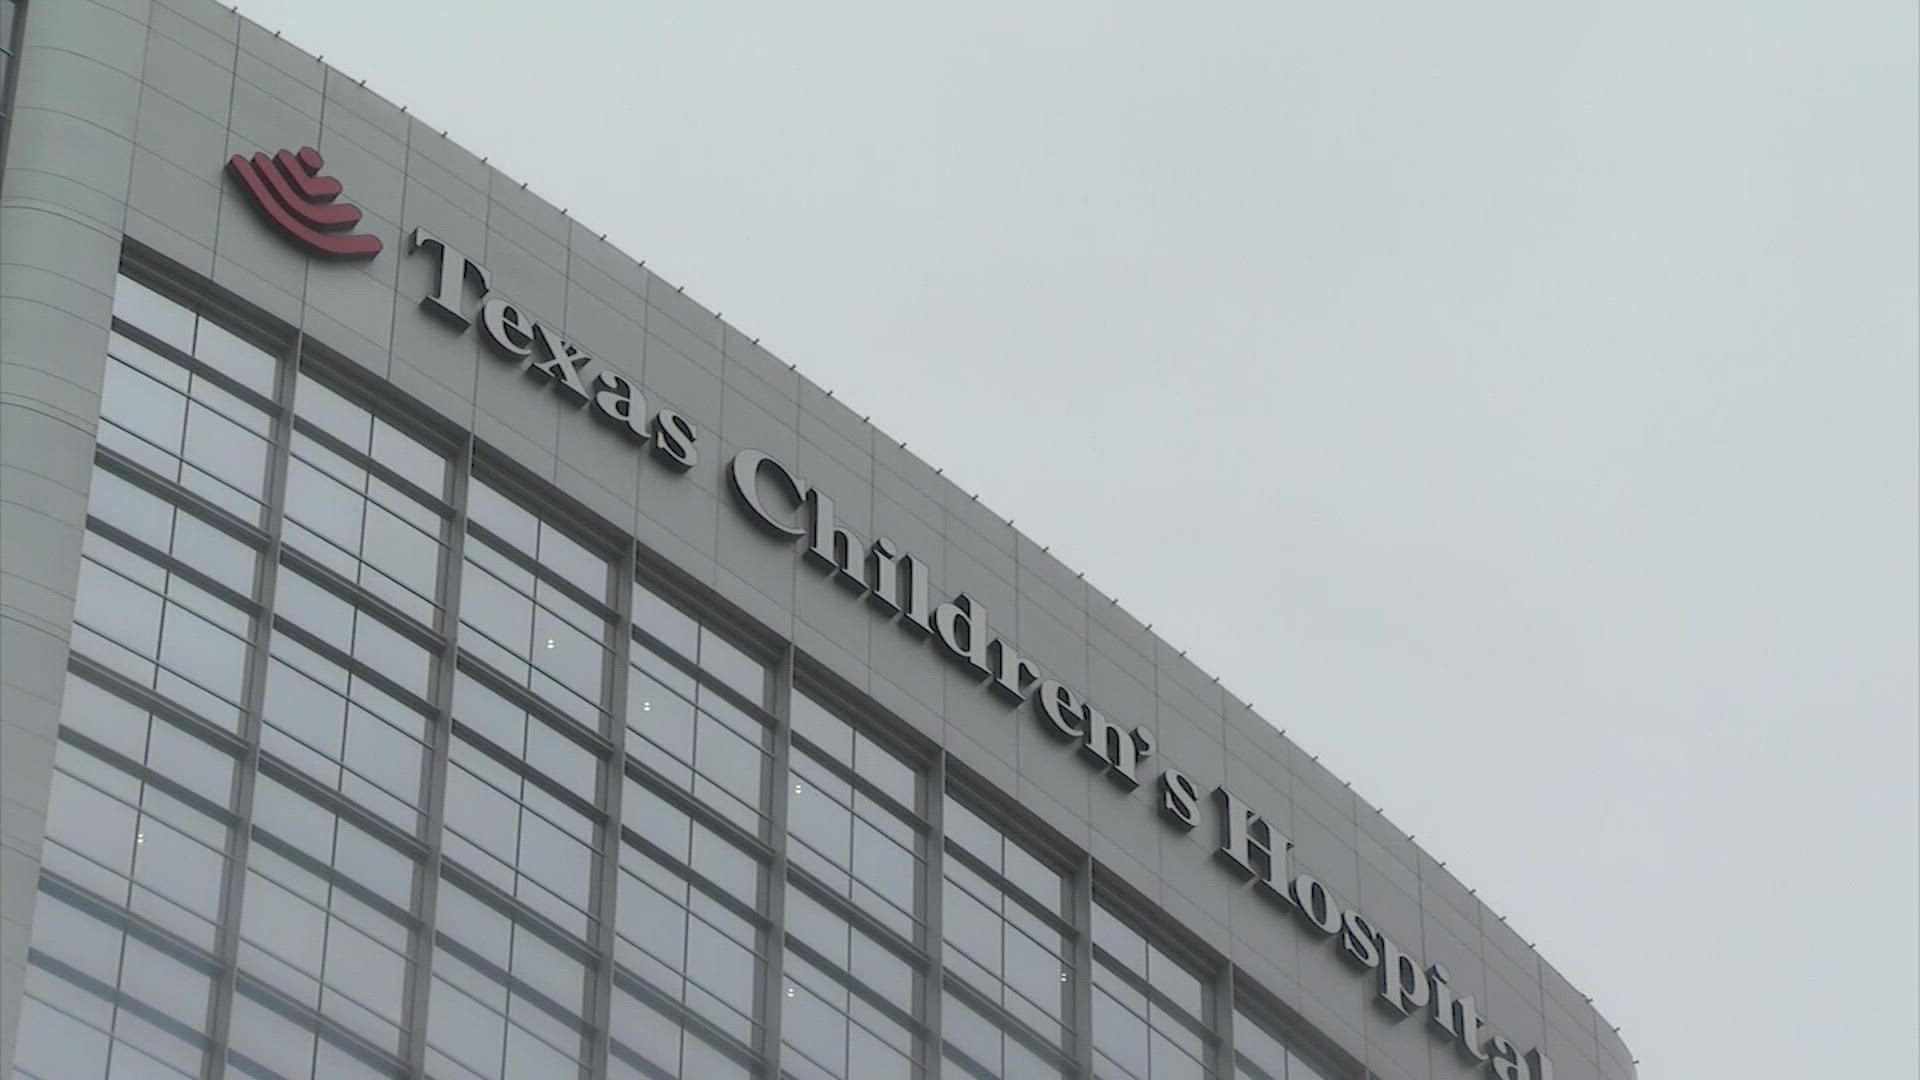 More than 50 children are battling COVID-19 at Texas Children’s Hospital.